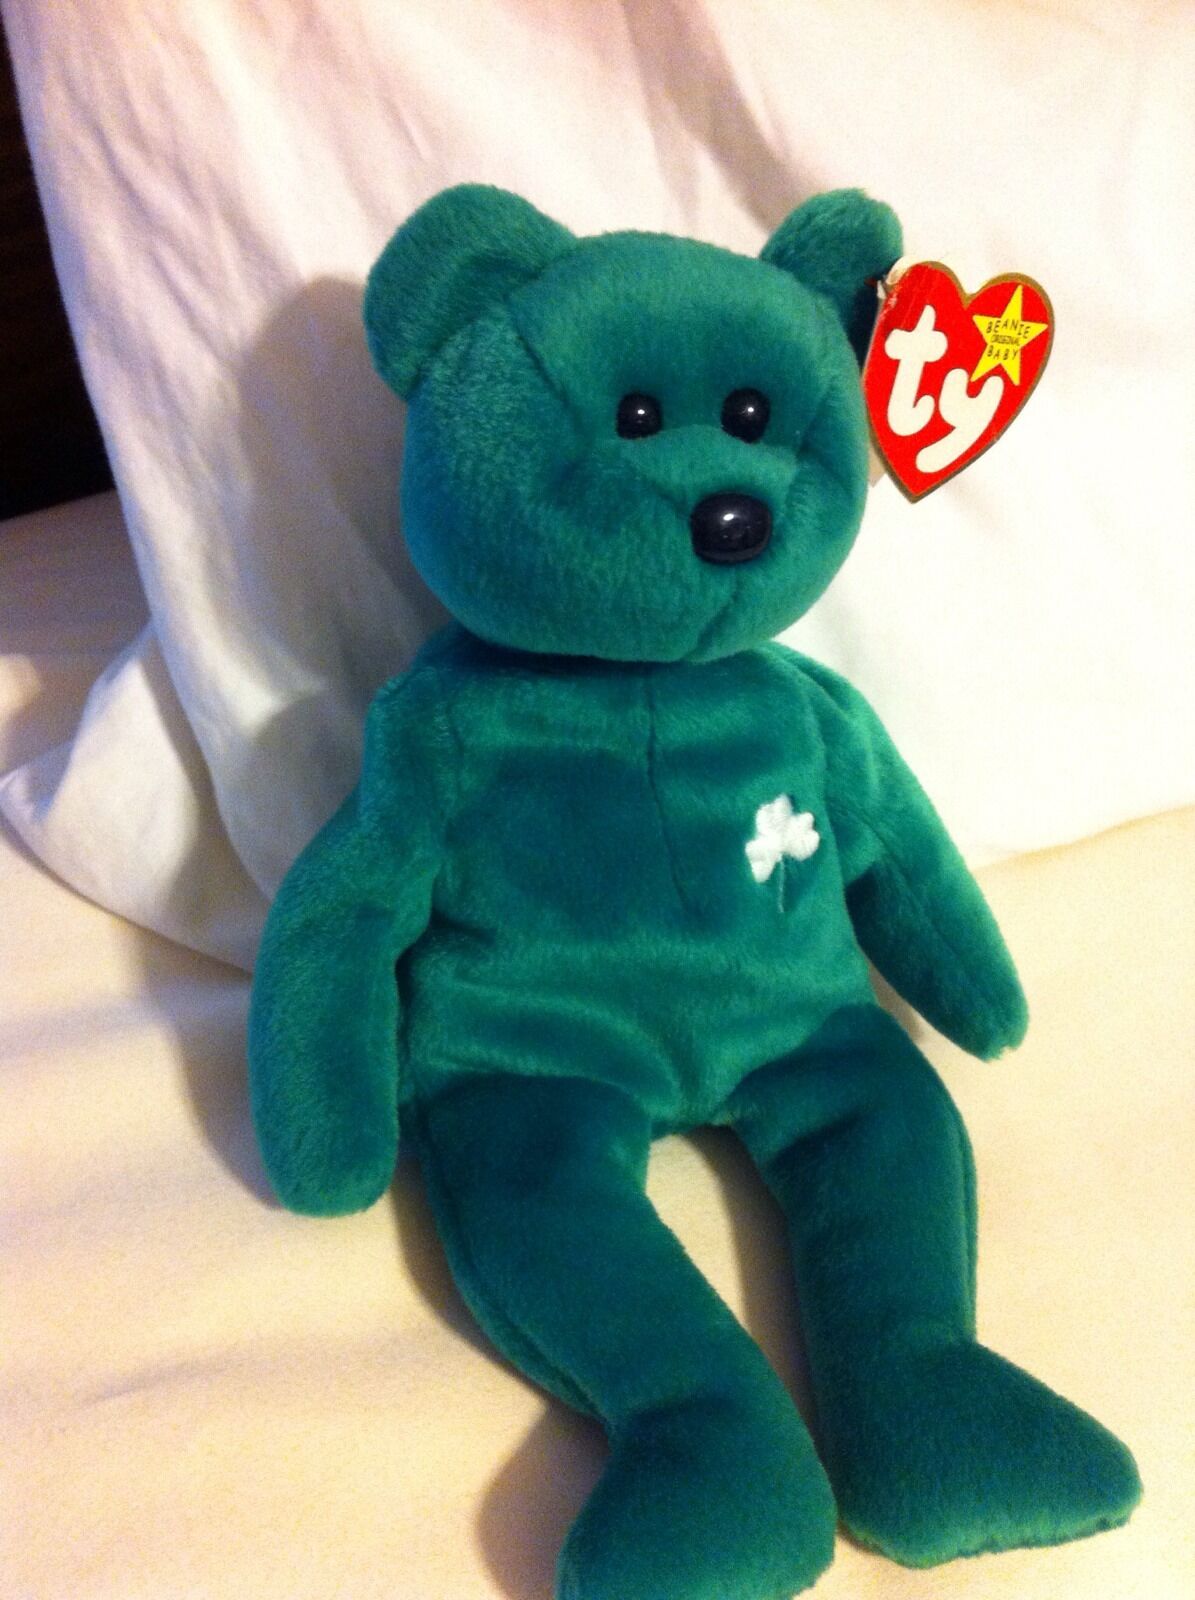 rarest ty beanie babies - Video Search Engine at Search.com